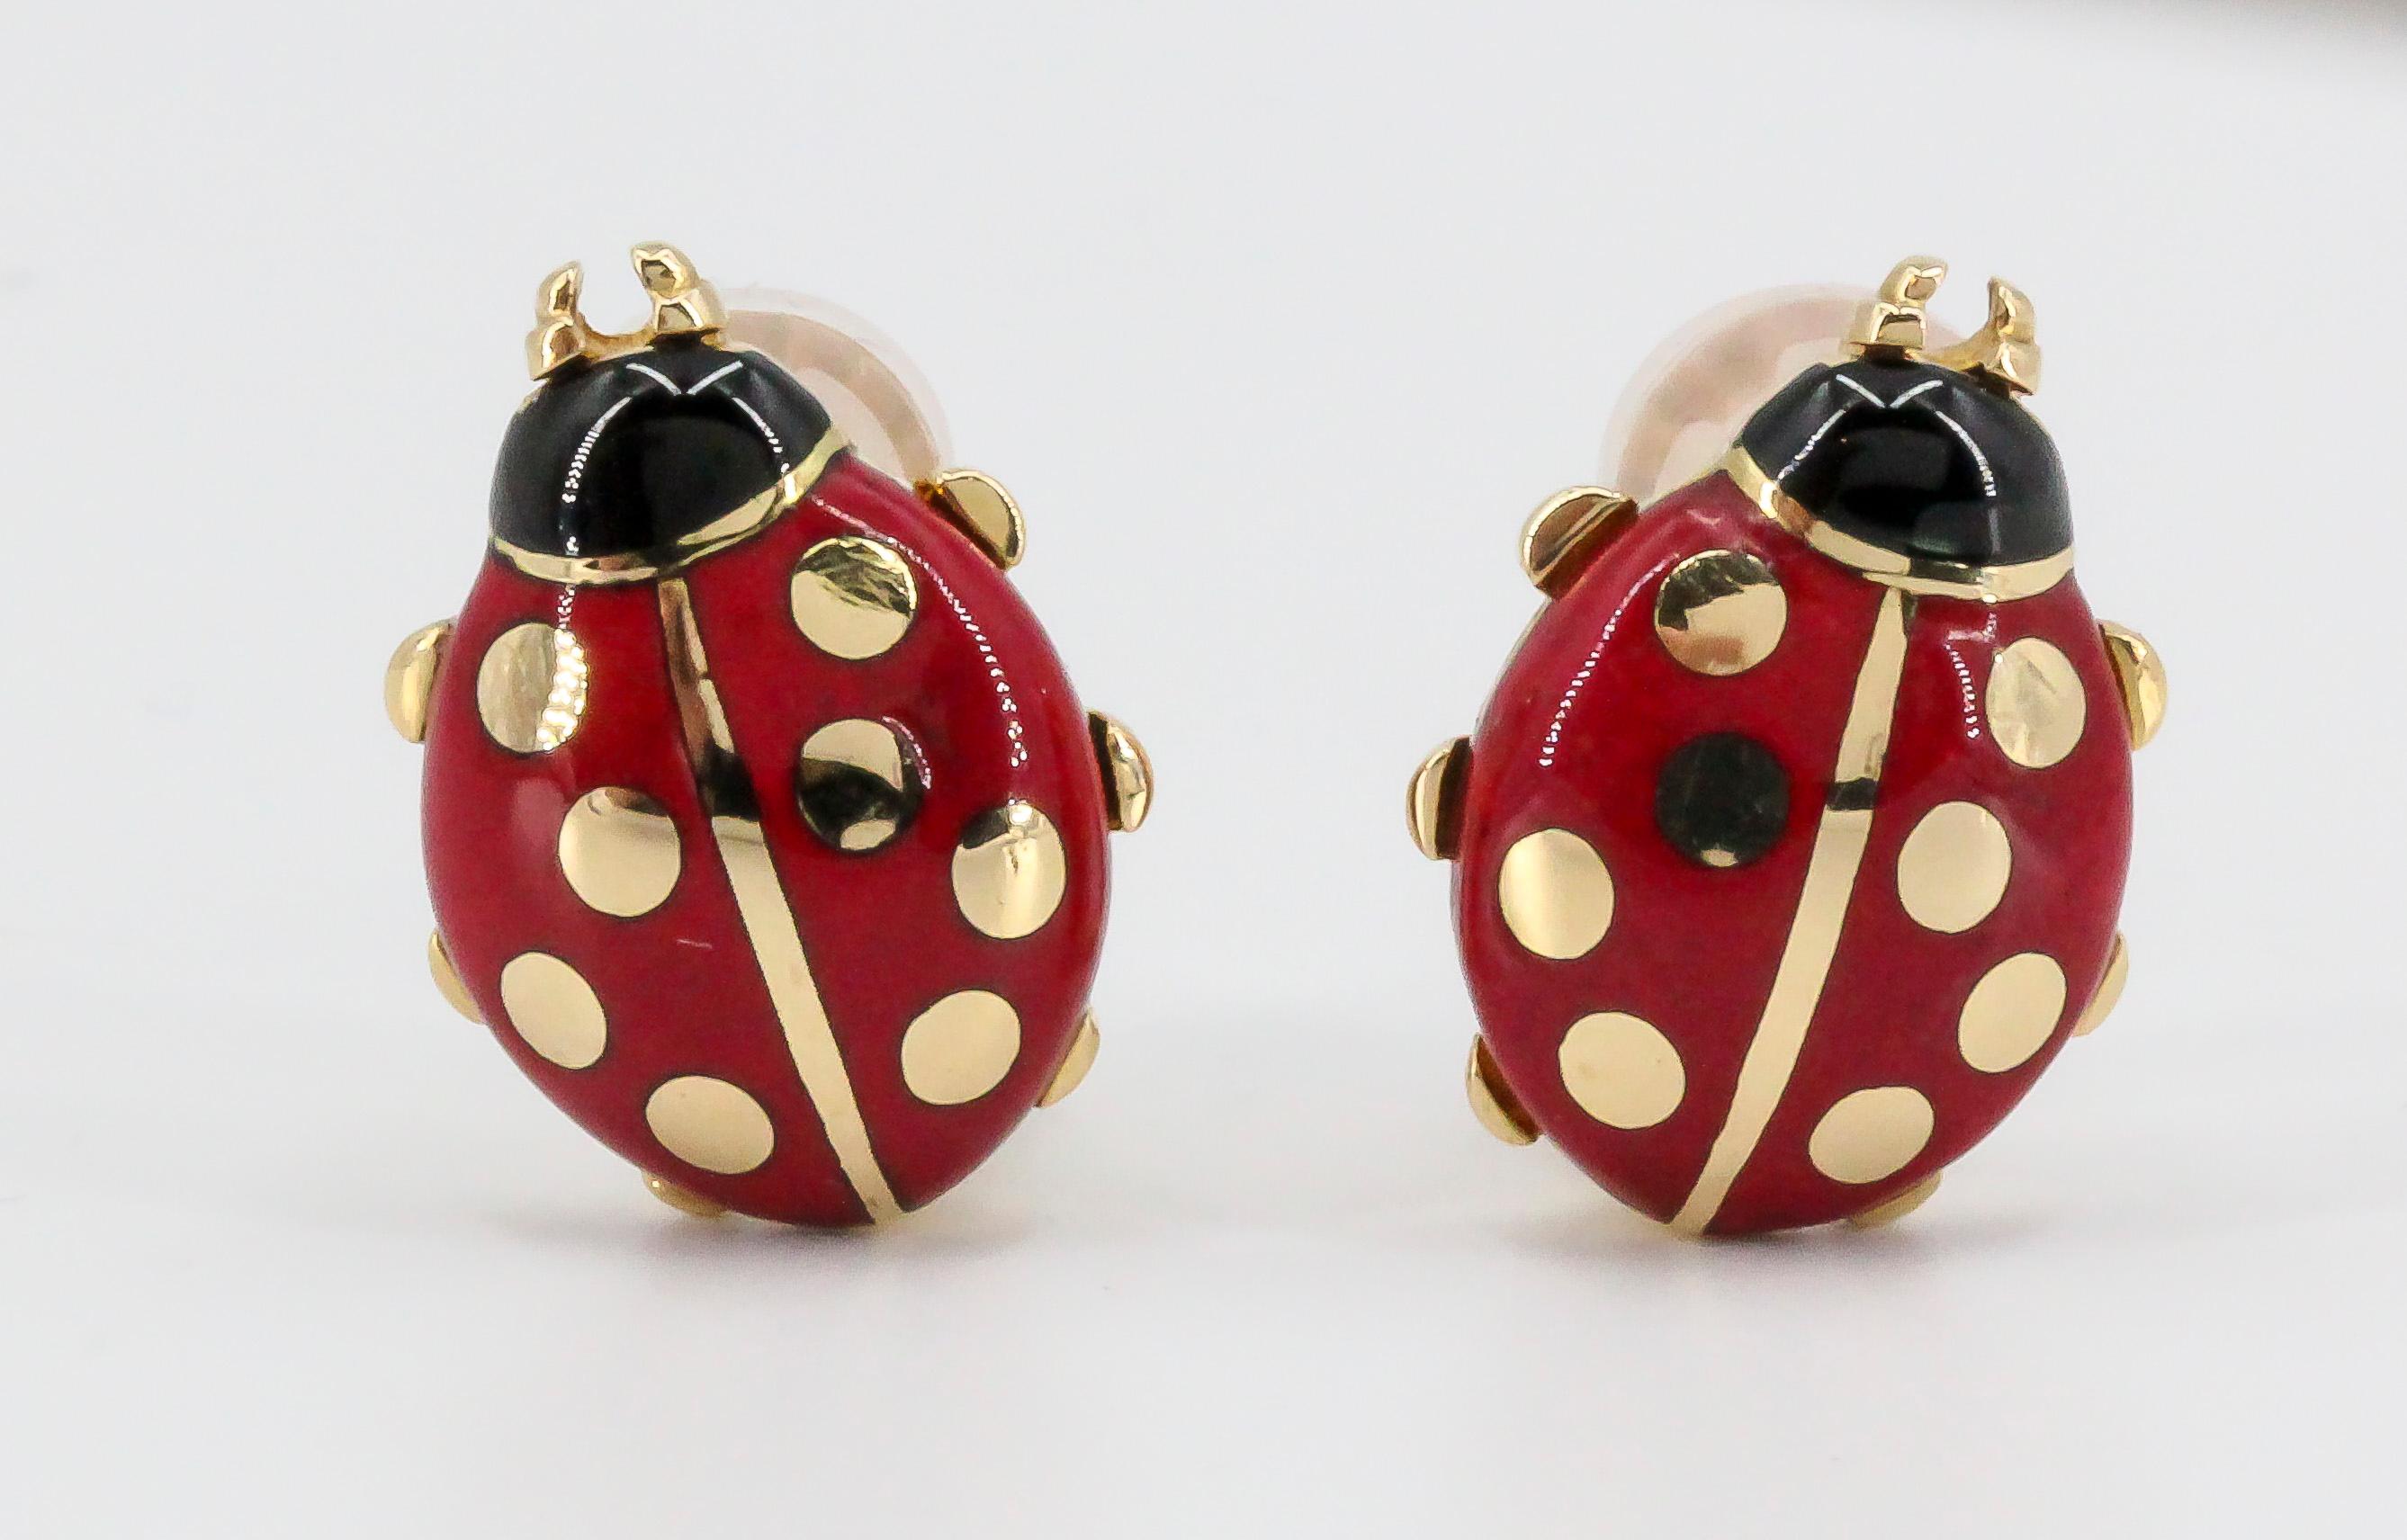 Whimsical 18K yellow gold and enamel earrings by Cartier. They resemble ladybugs, with red and black enamel over an 18K gold setting. 

Hallmarks: Cartier, reference numbers, 750, 1990, copyright.